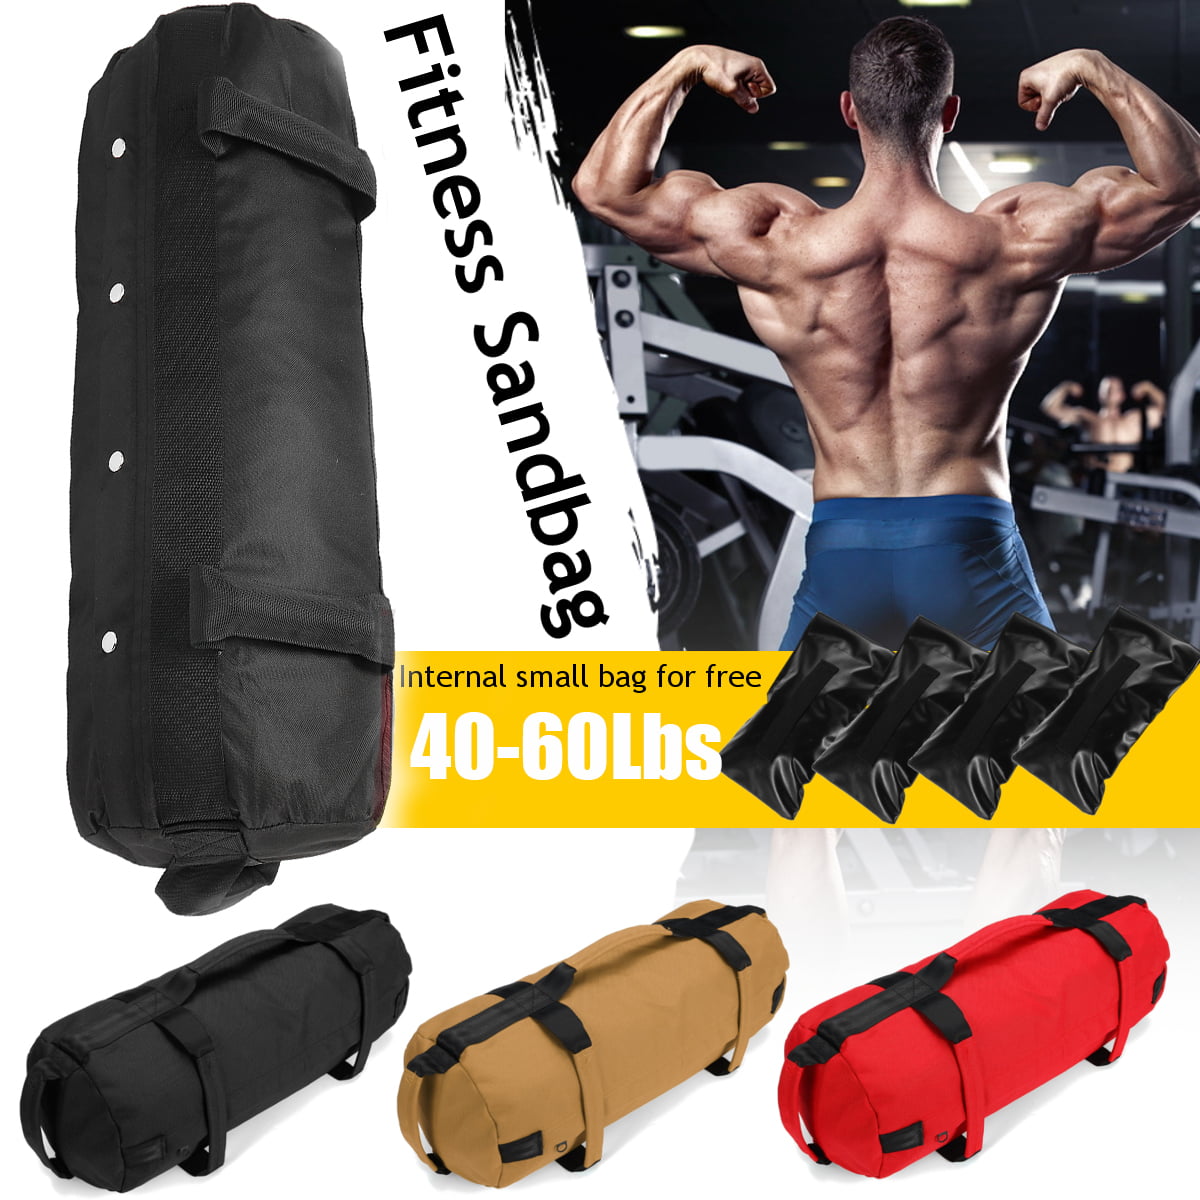 Fitness Exercise Weighted Sandbags Body Press Durable w Filler 60 lbs 